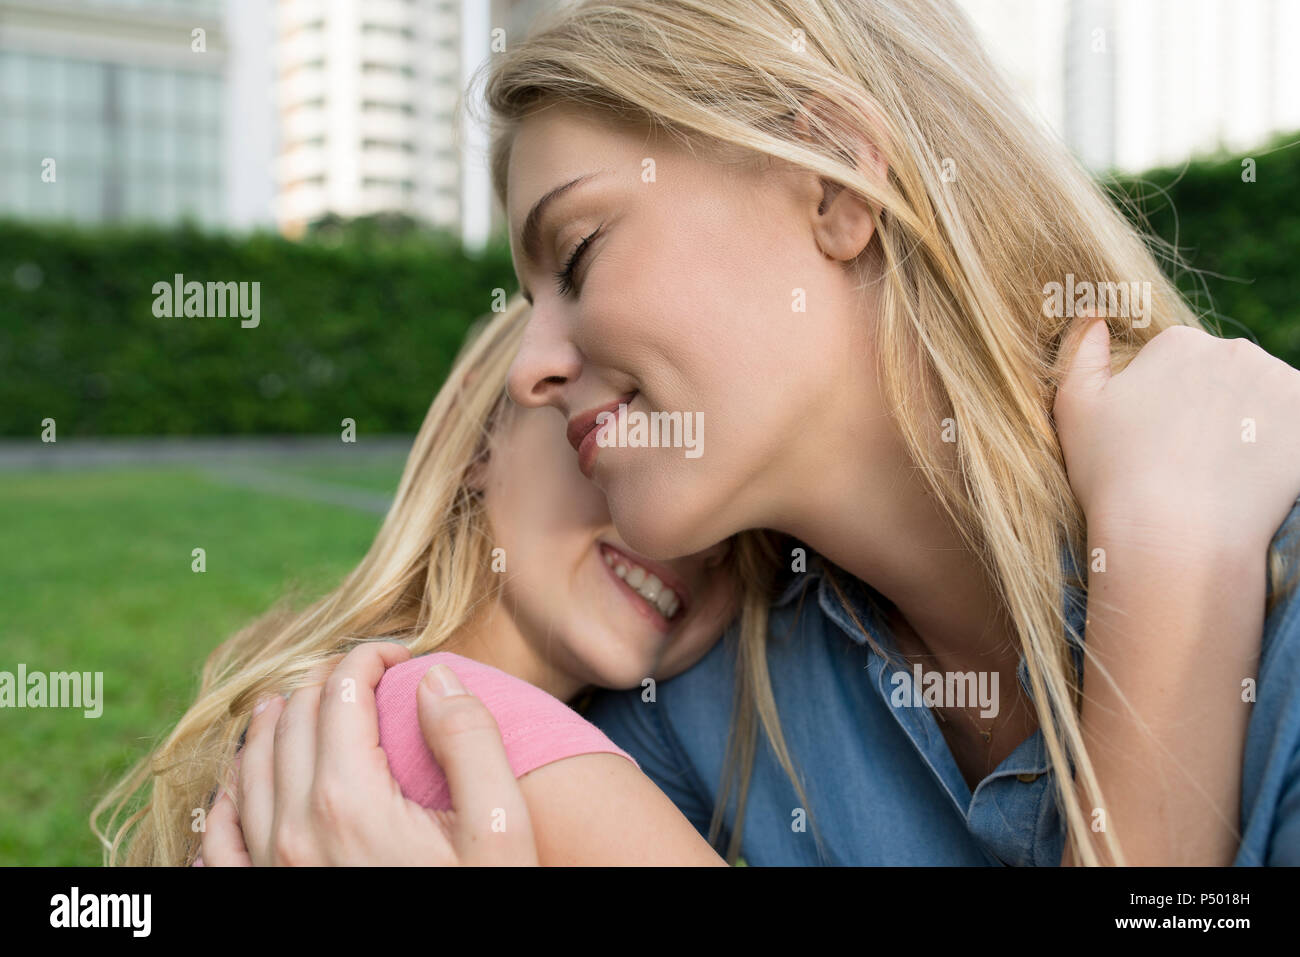 Happy mother and daughter hugging and smiling in urban city garden Stock Photo